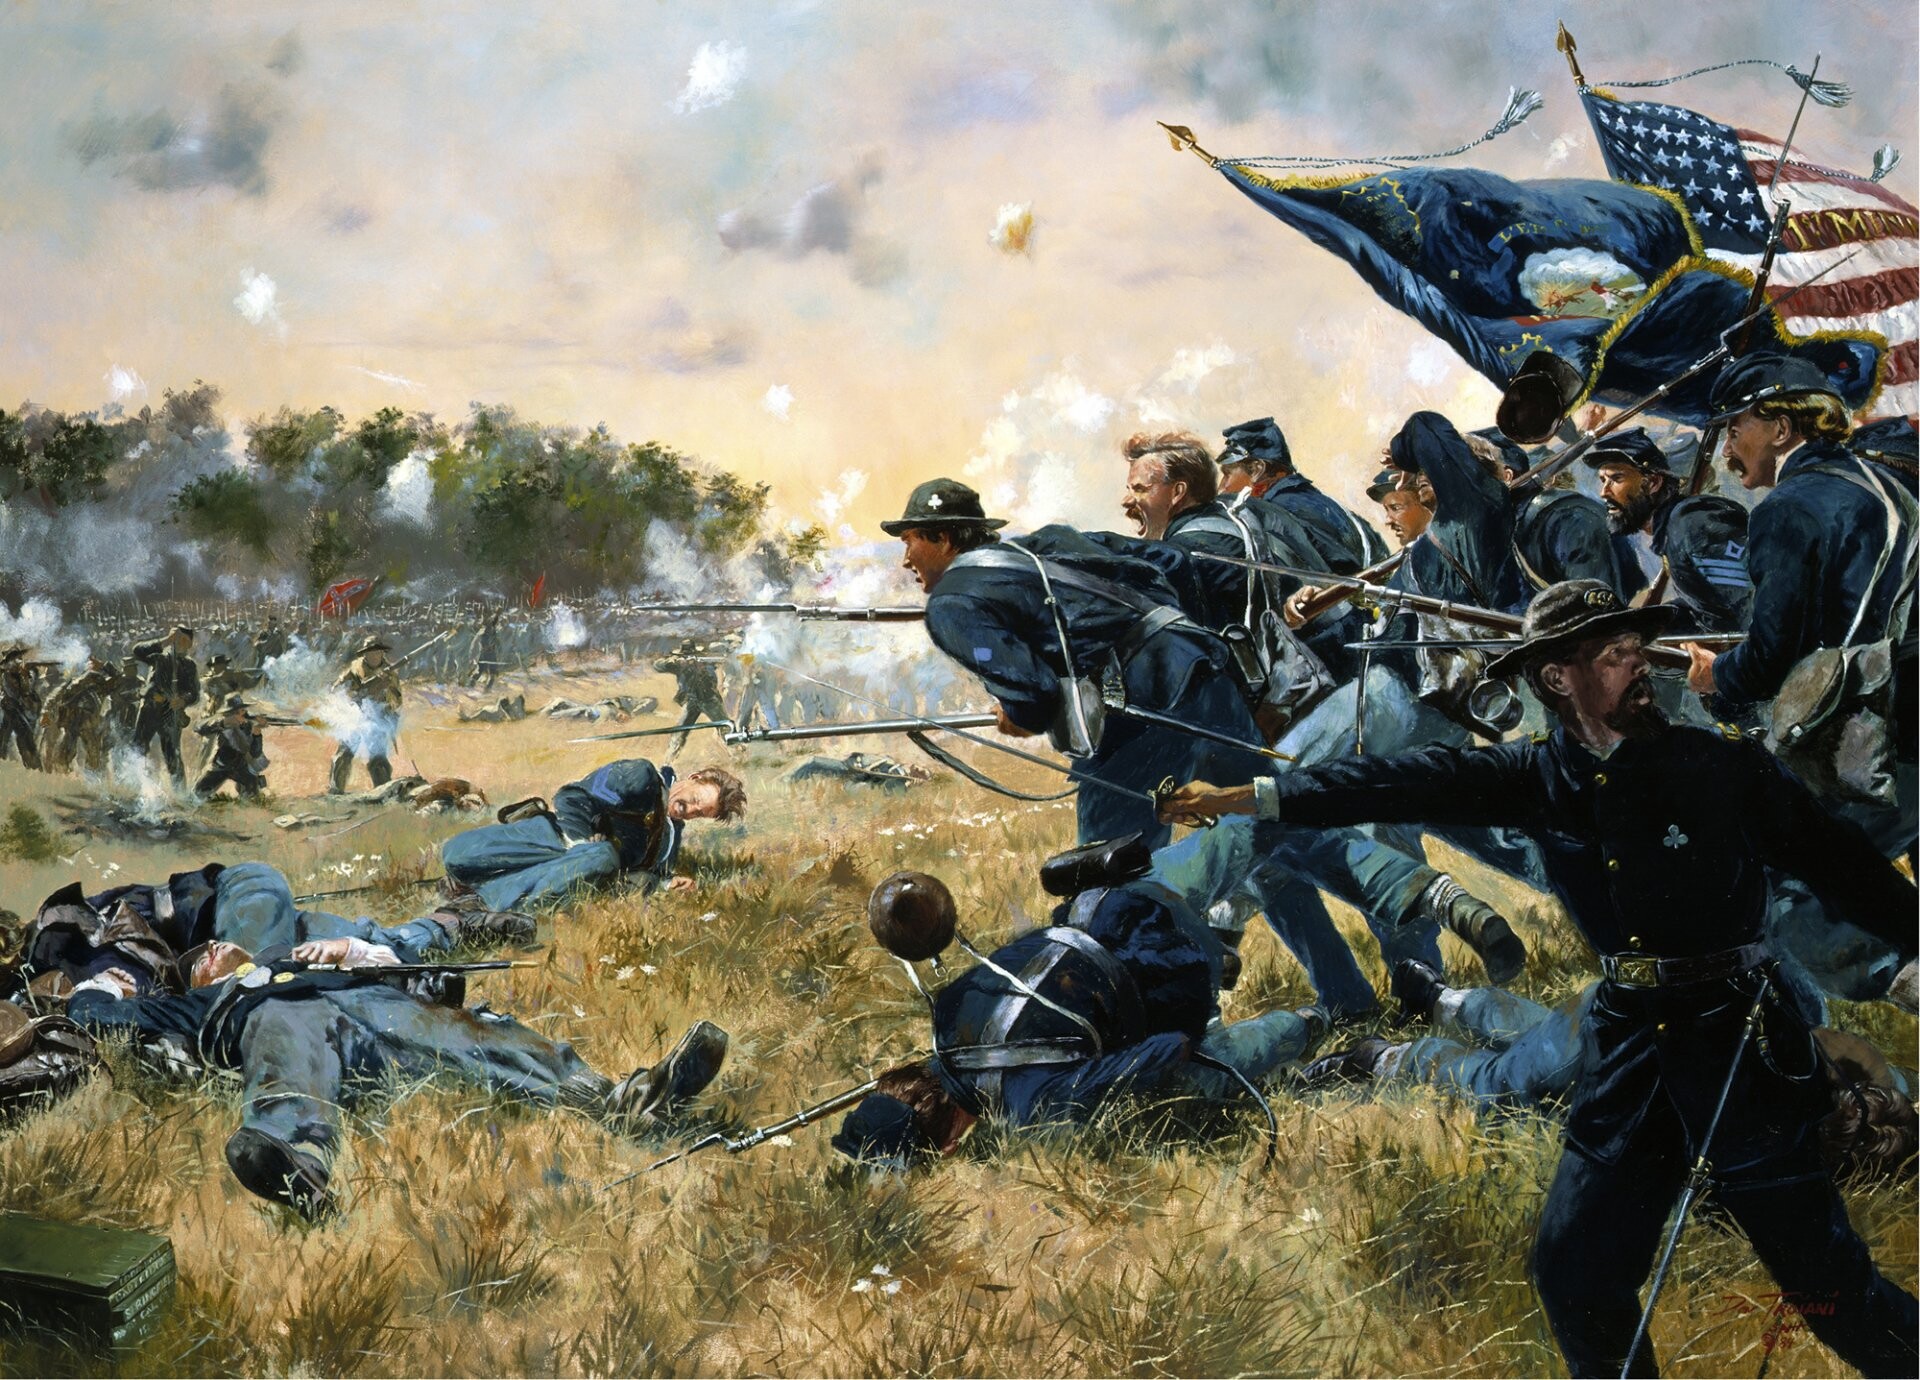 Gettysburg: The US Army of Potomac defeats Confederate General Robert E. Lee's Army of Northern Virginia, Art. 1920x1380 HD Wallpaper.